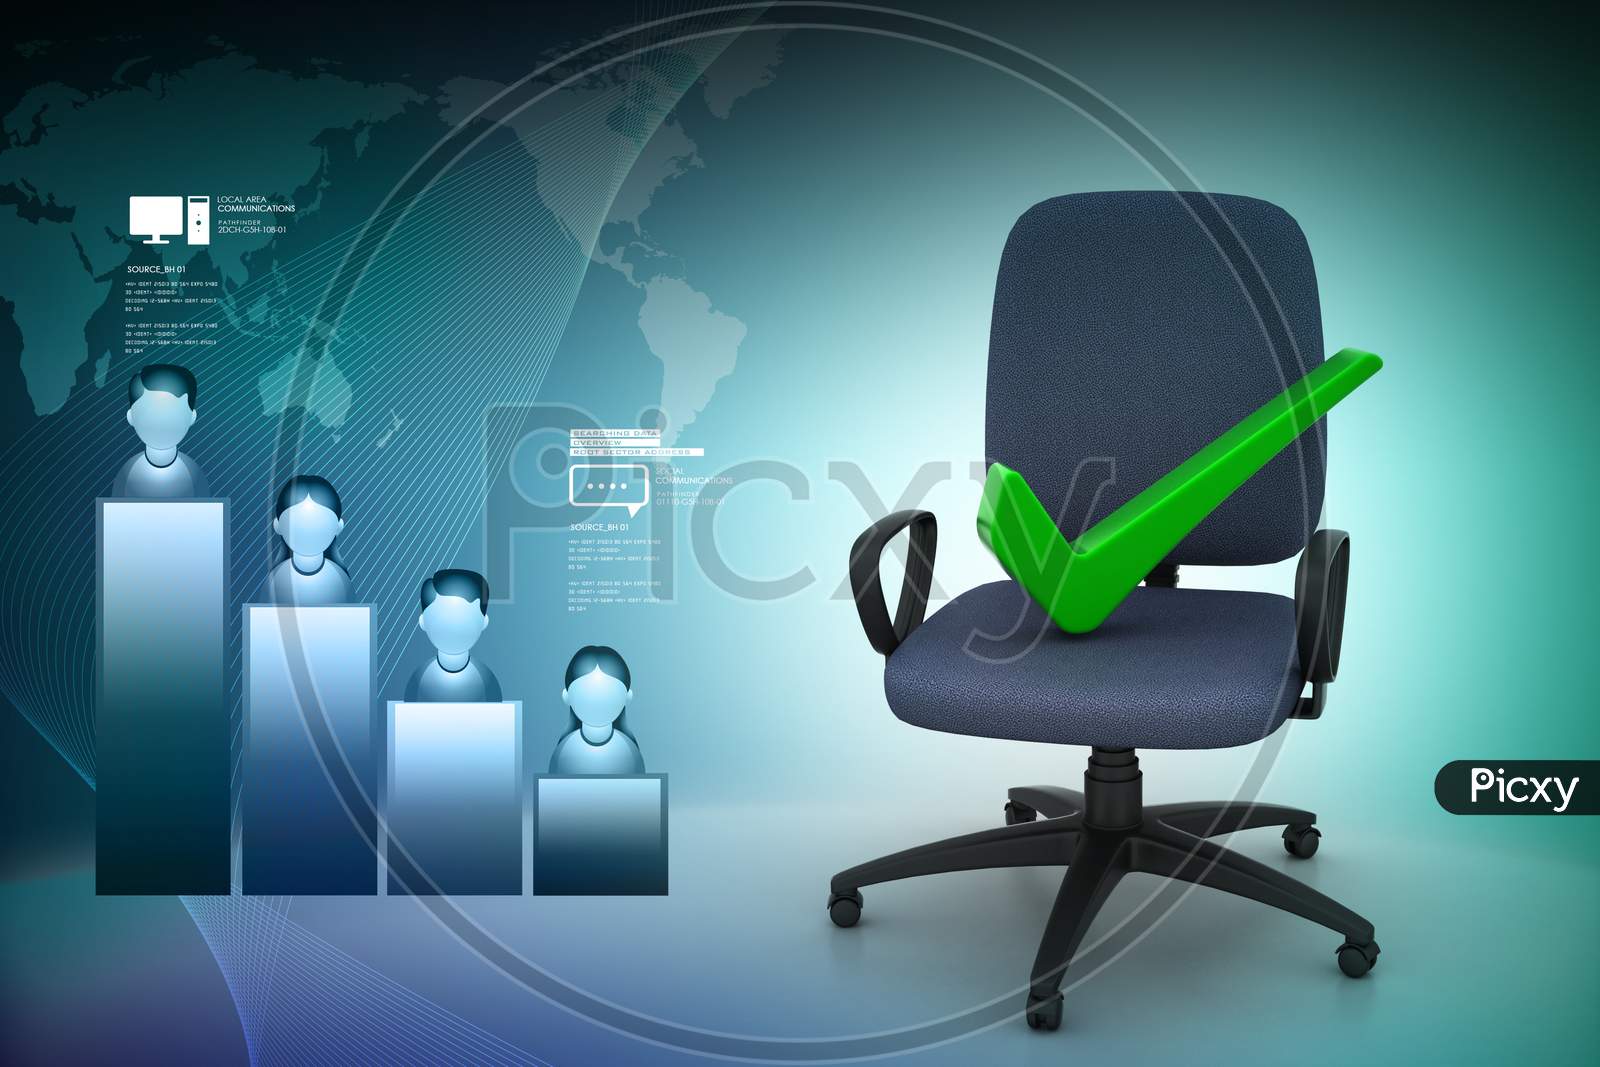 An Office Chair with Green Ticked Mark